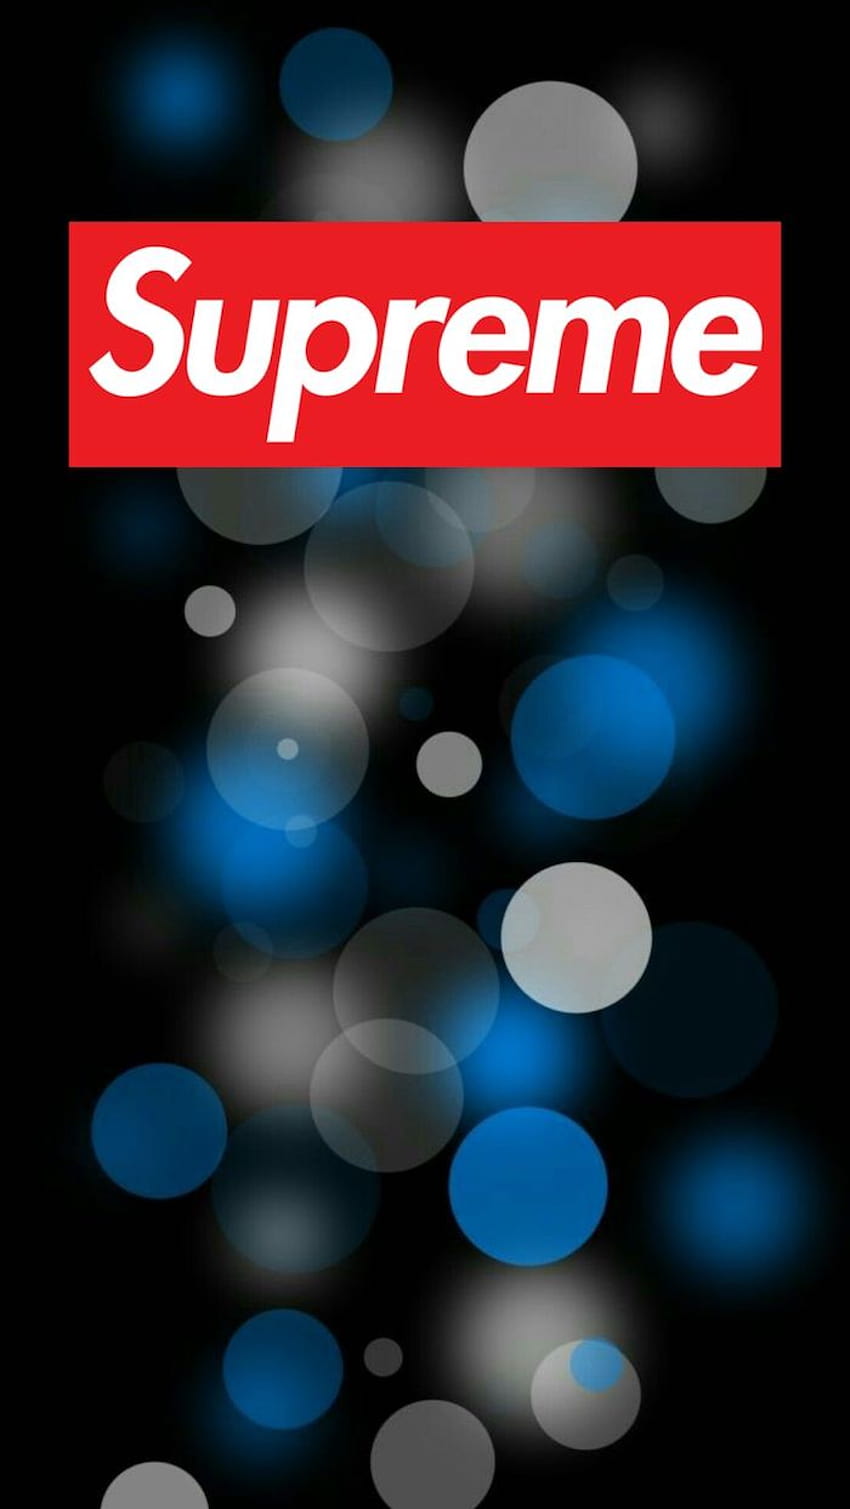 100+] Blue Supreme Wallpapers